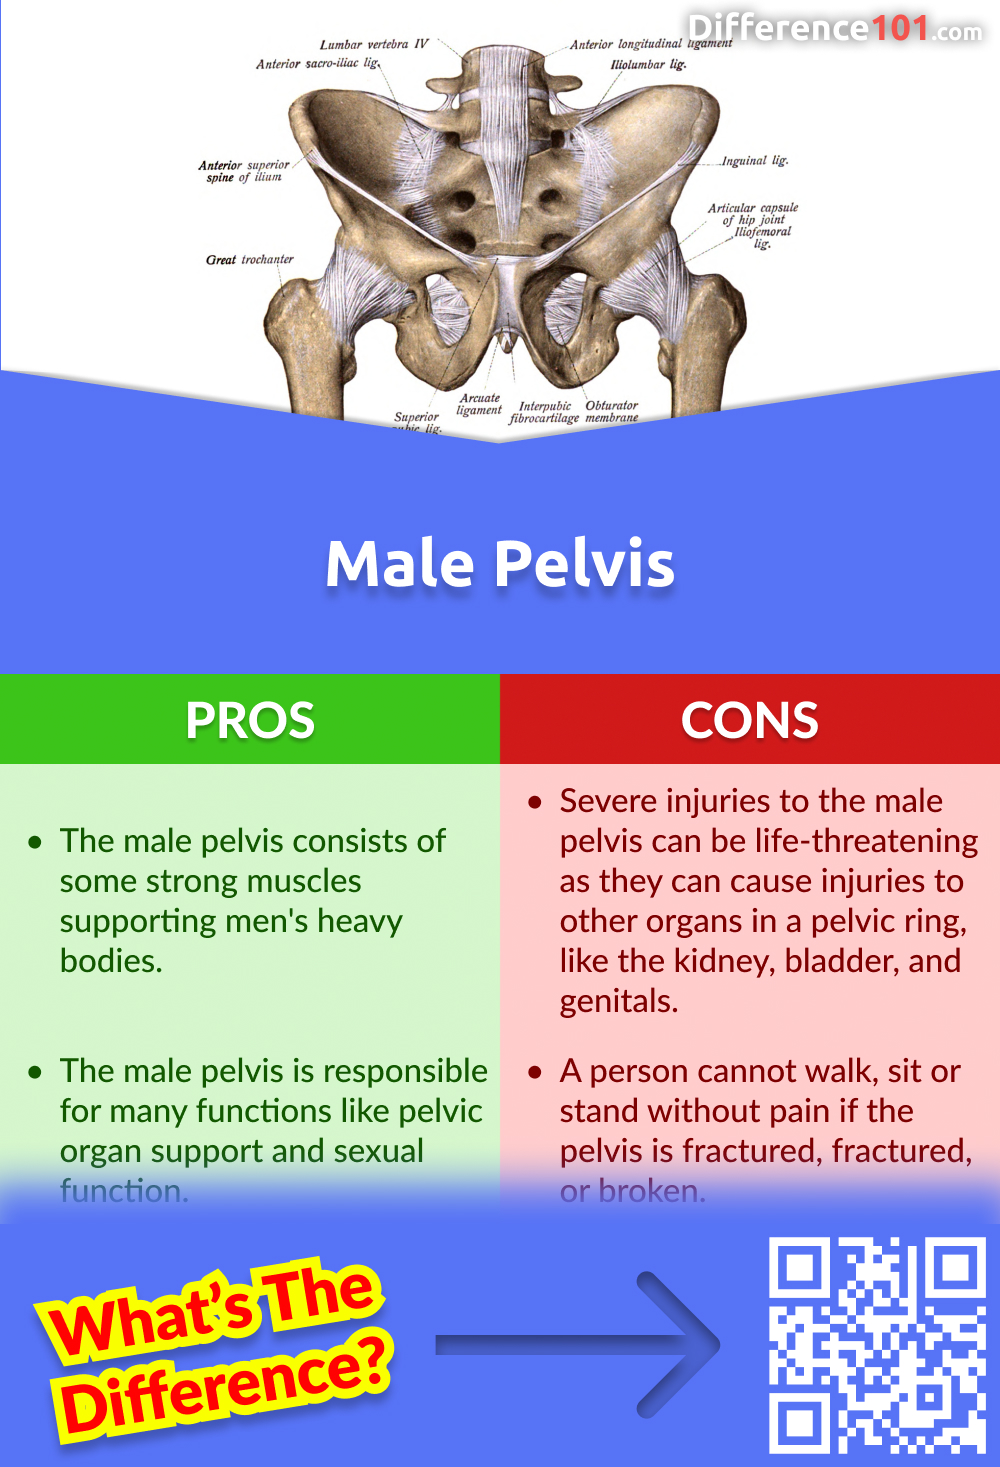 Male Pelvis Pros and Cons